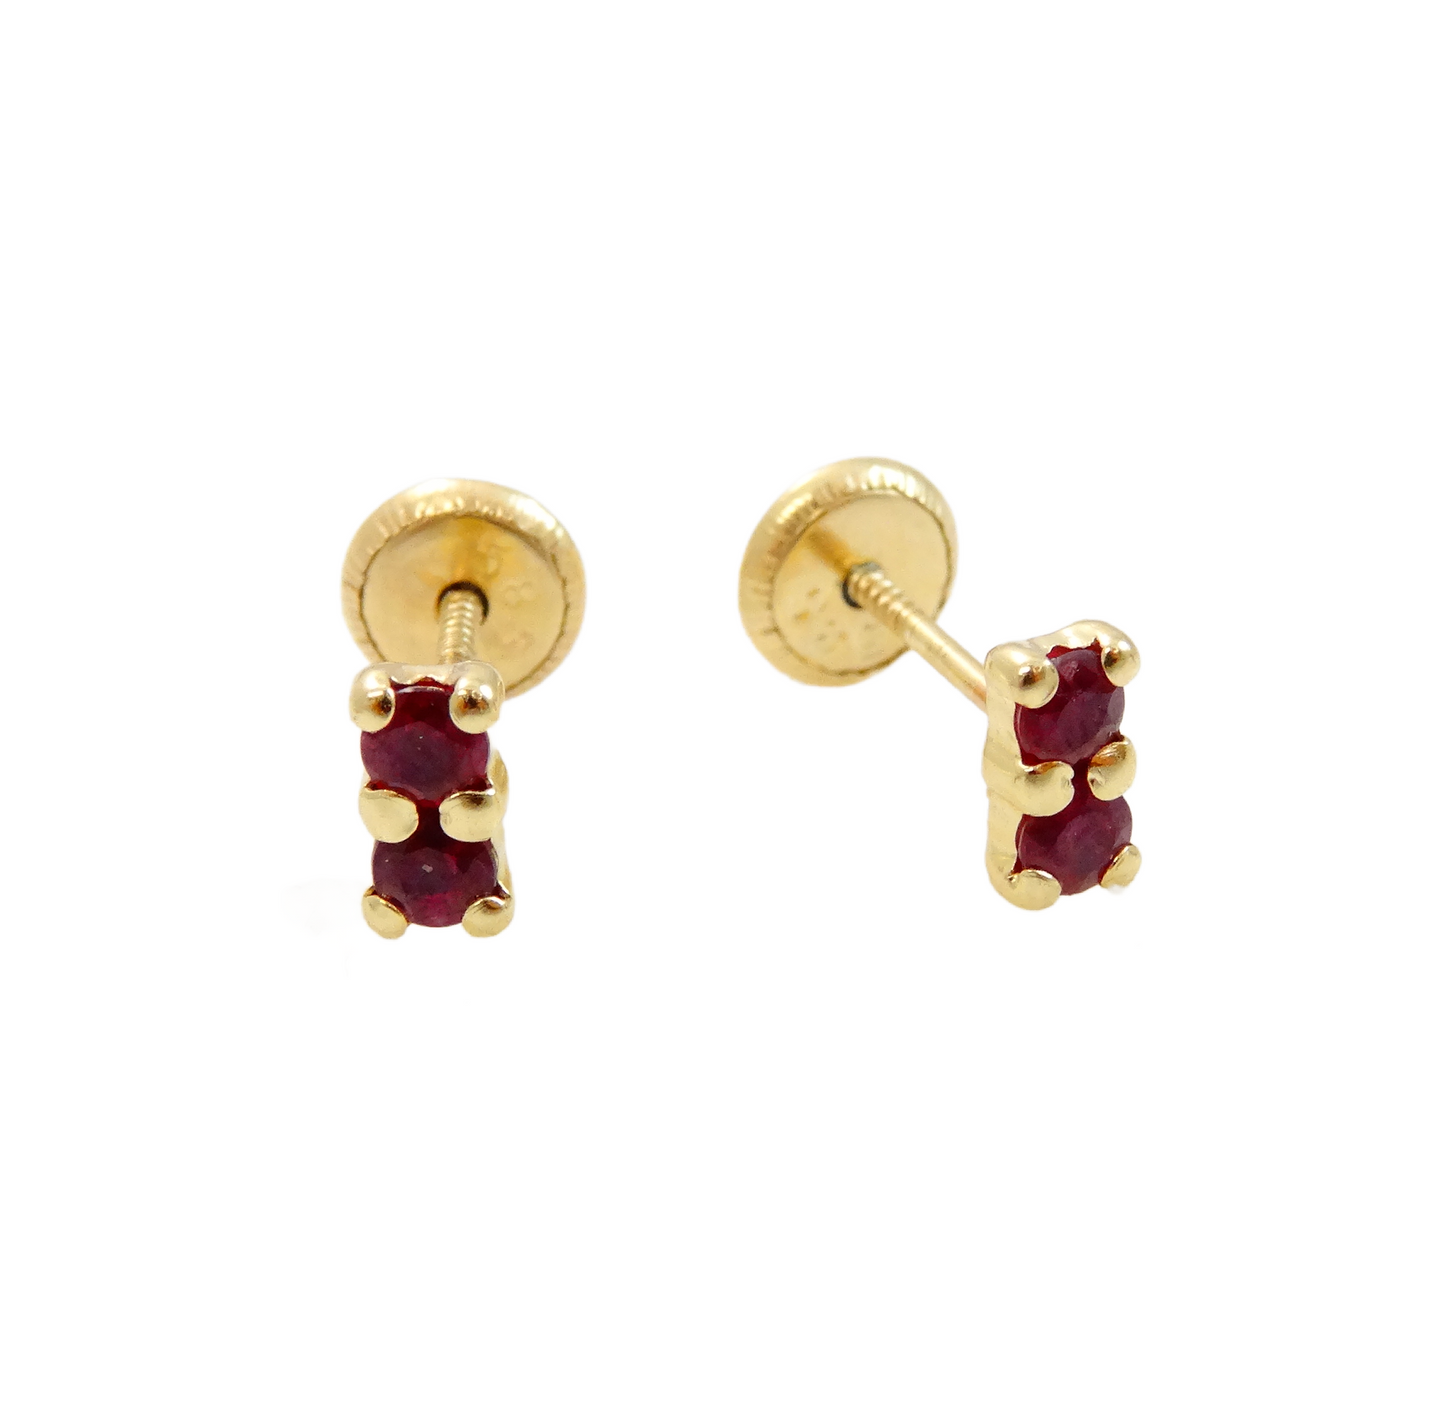 14K Gold two color Stone baby earrings